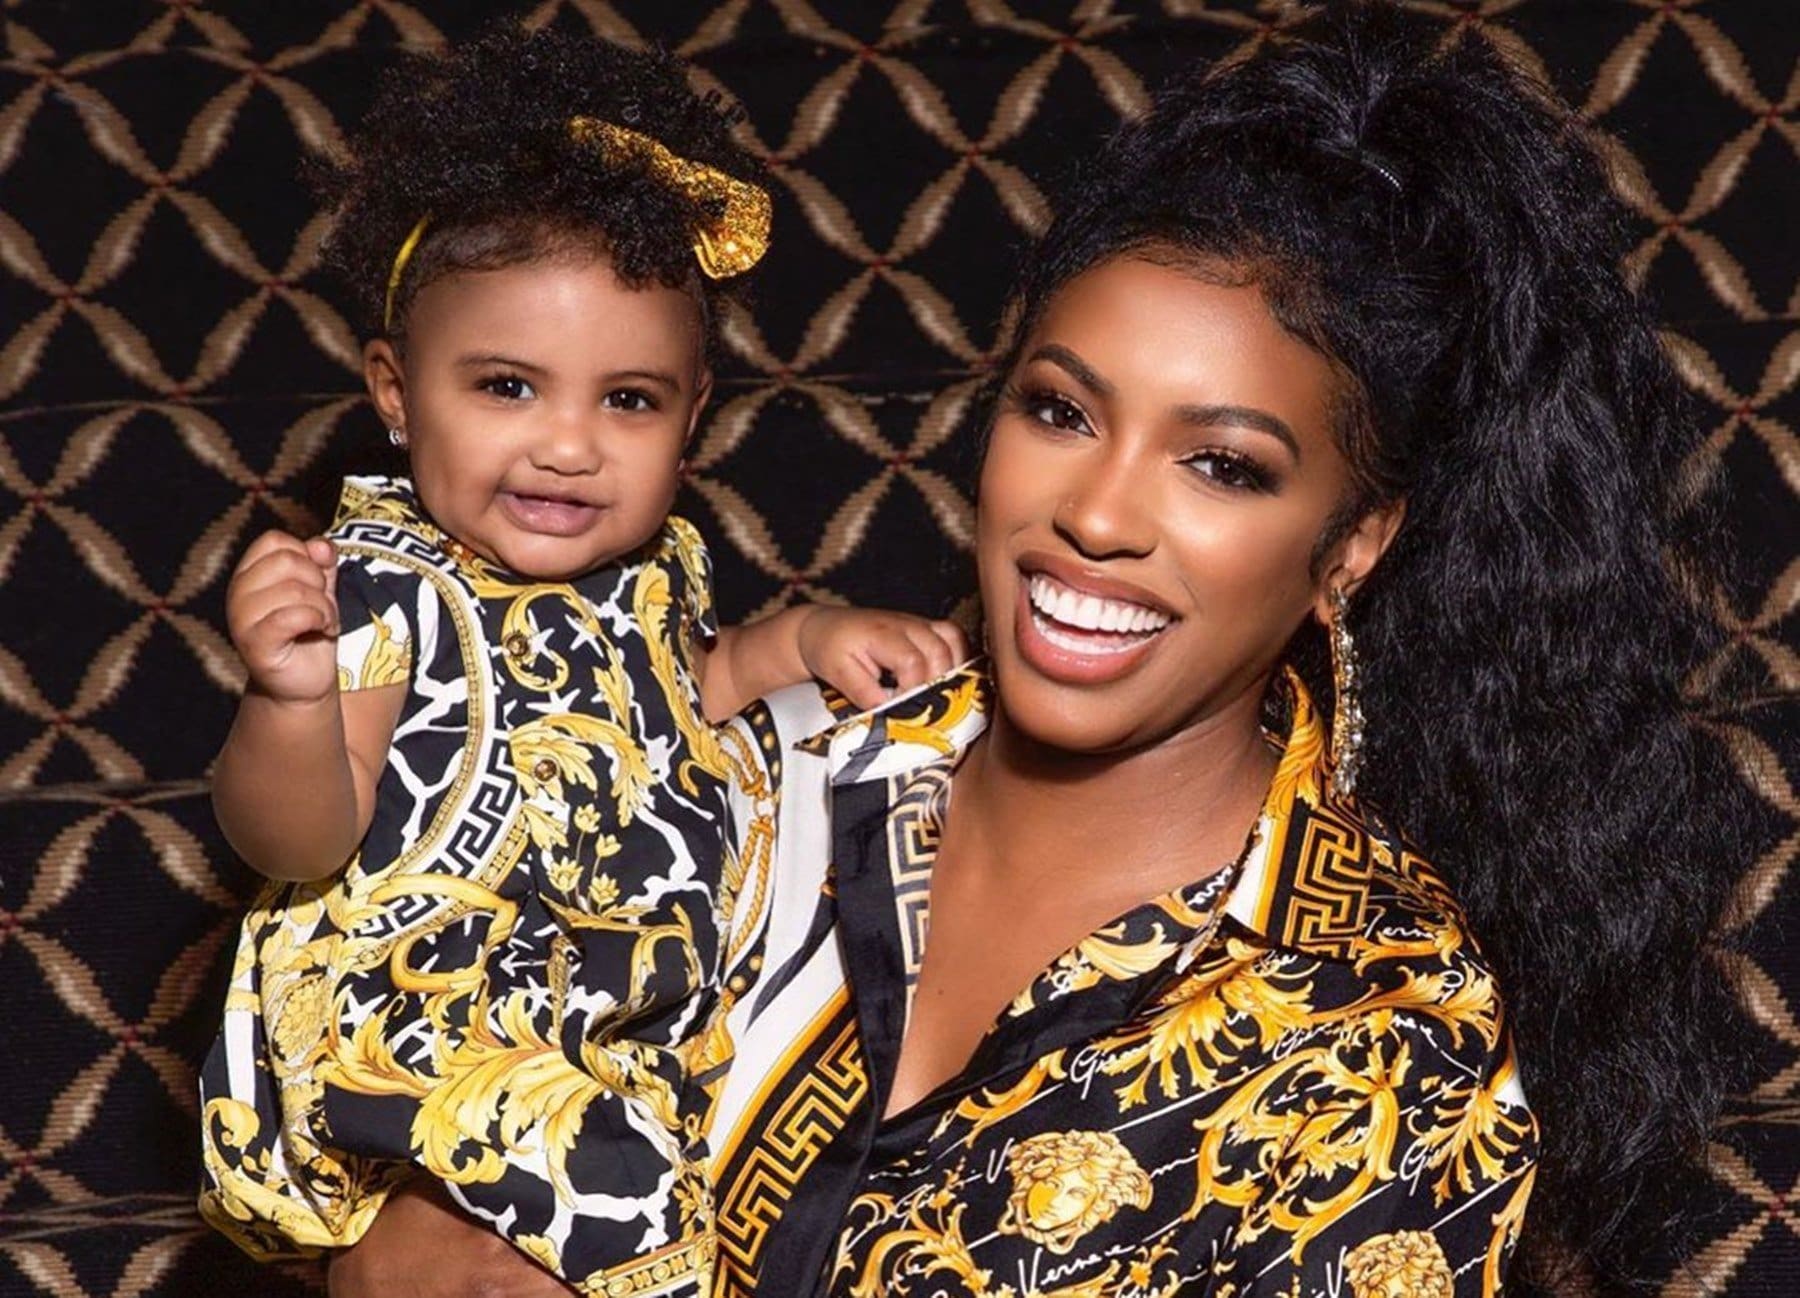 ”porsha-williams-will-make-your-day-with-this-video-featuring-her-baby-girl-pilar-jhena”